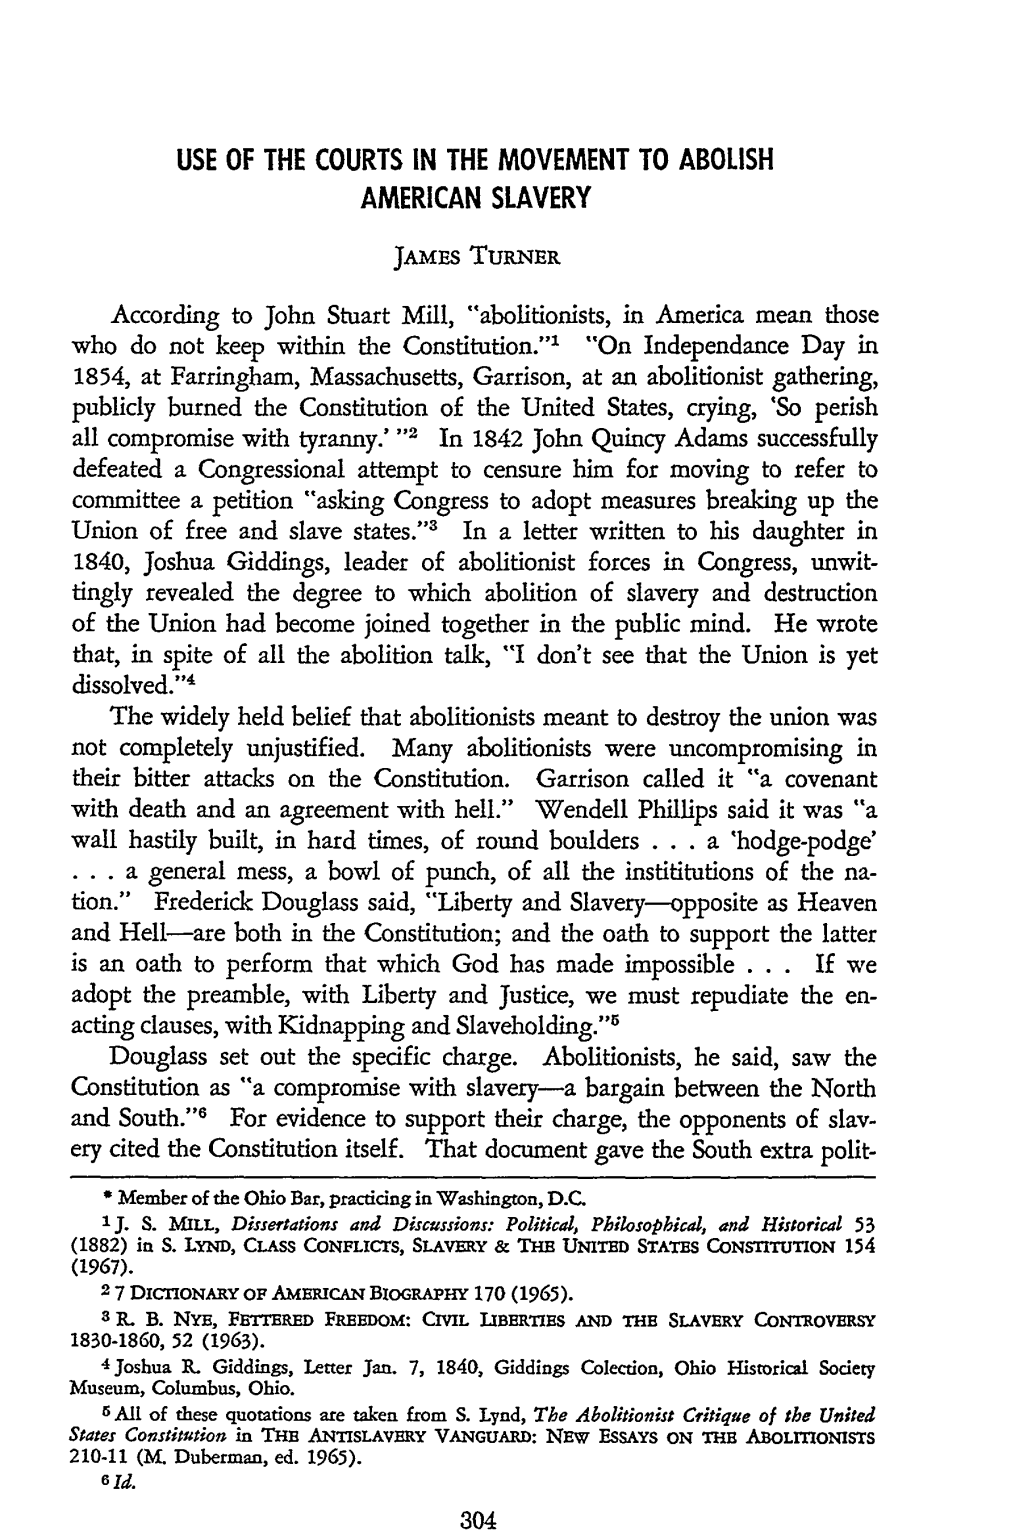 Use of the Courts in the Movement to Abolish American Slavery